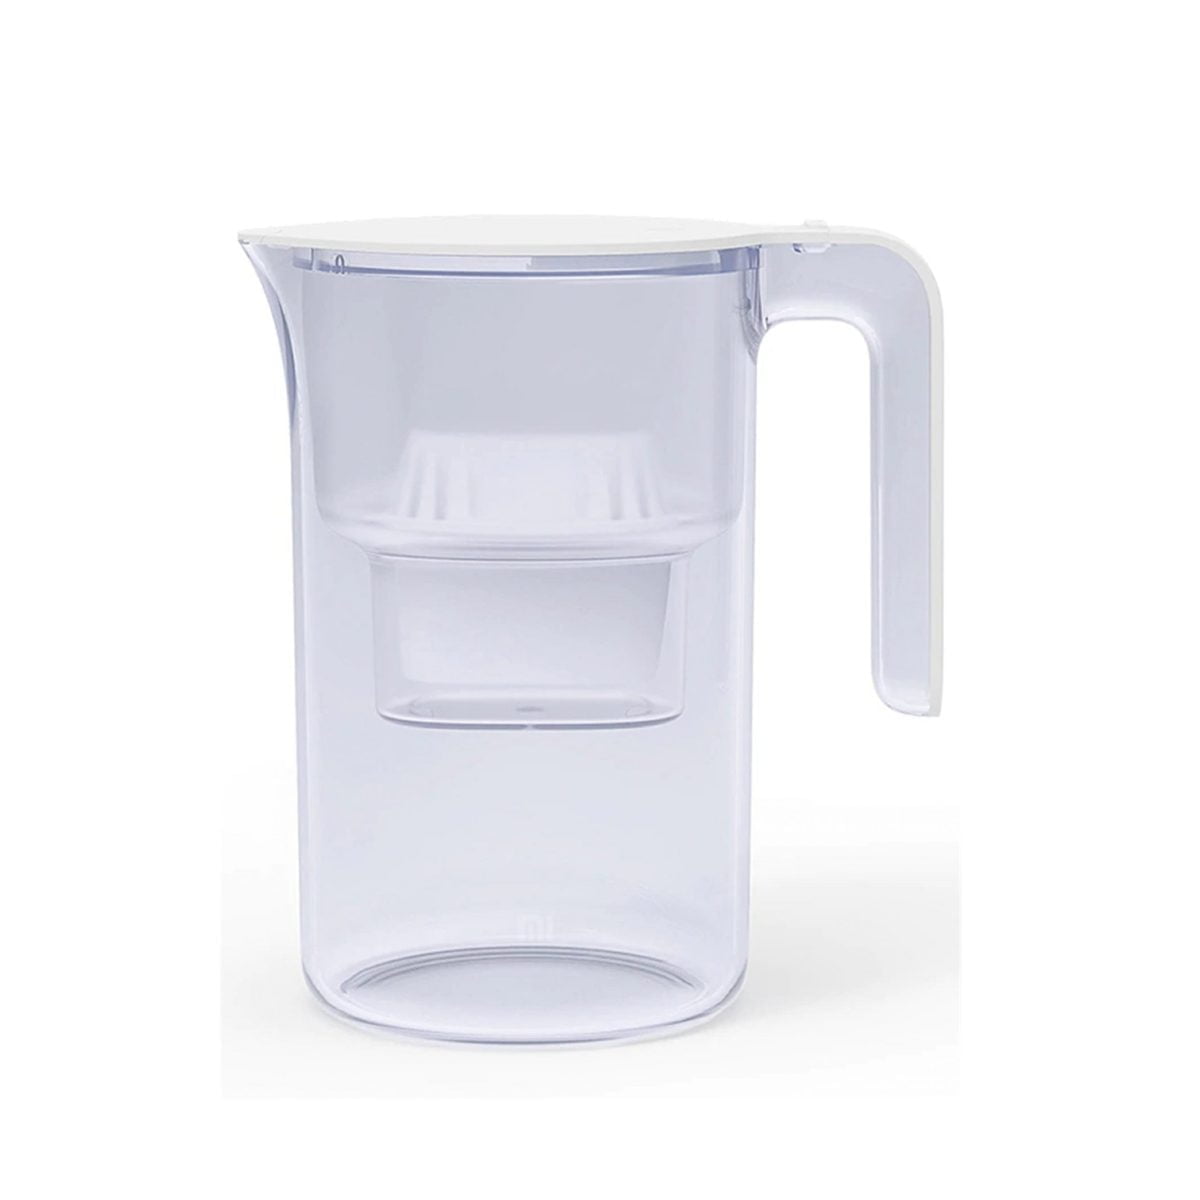 Water 03 Scaled Xiaomi Xiaomi Mi Home Water Filter Pitcher Easy To Remove The Lid, Funnel Open Design, Dust-Proof Spout &Nbsp; Xiaomi Xiaomi Mi Home Water Filter Pitcher